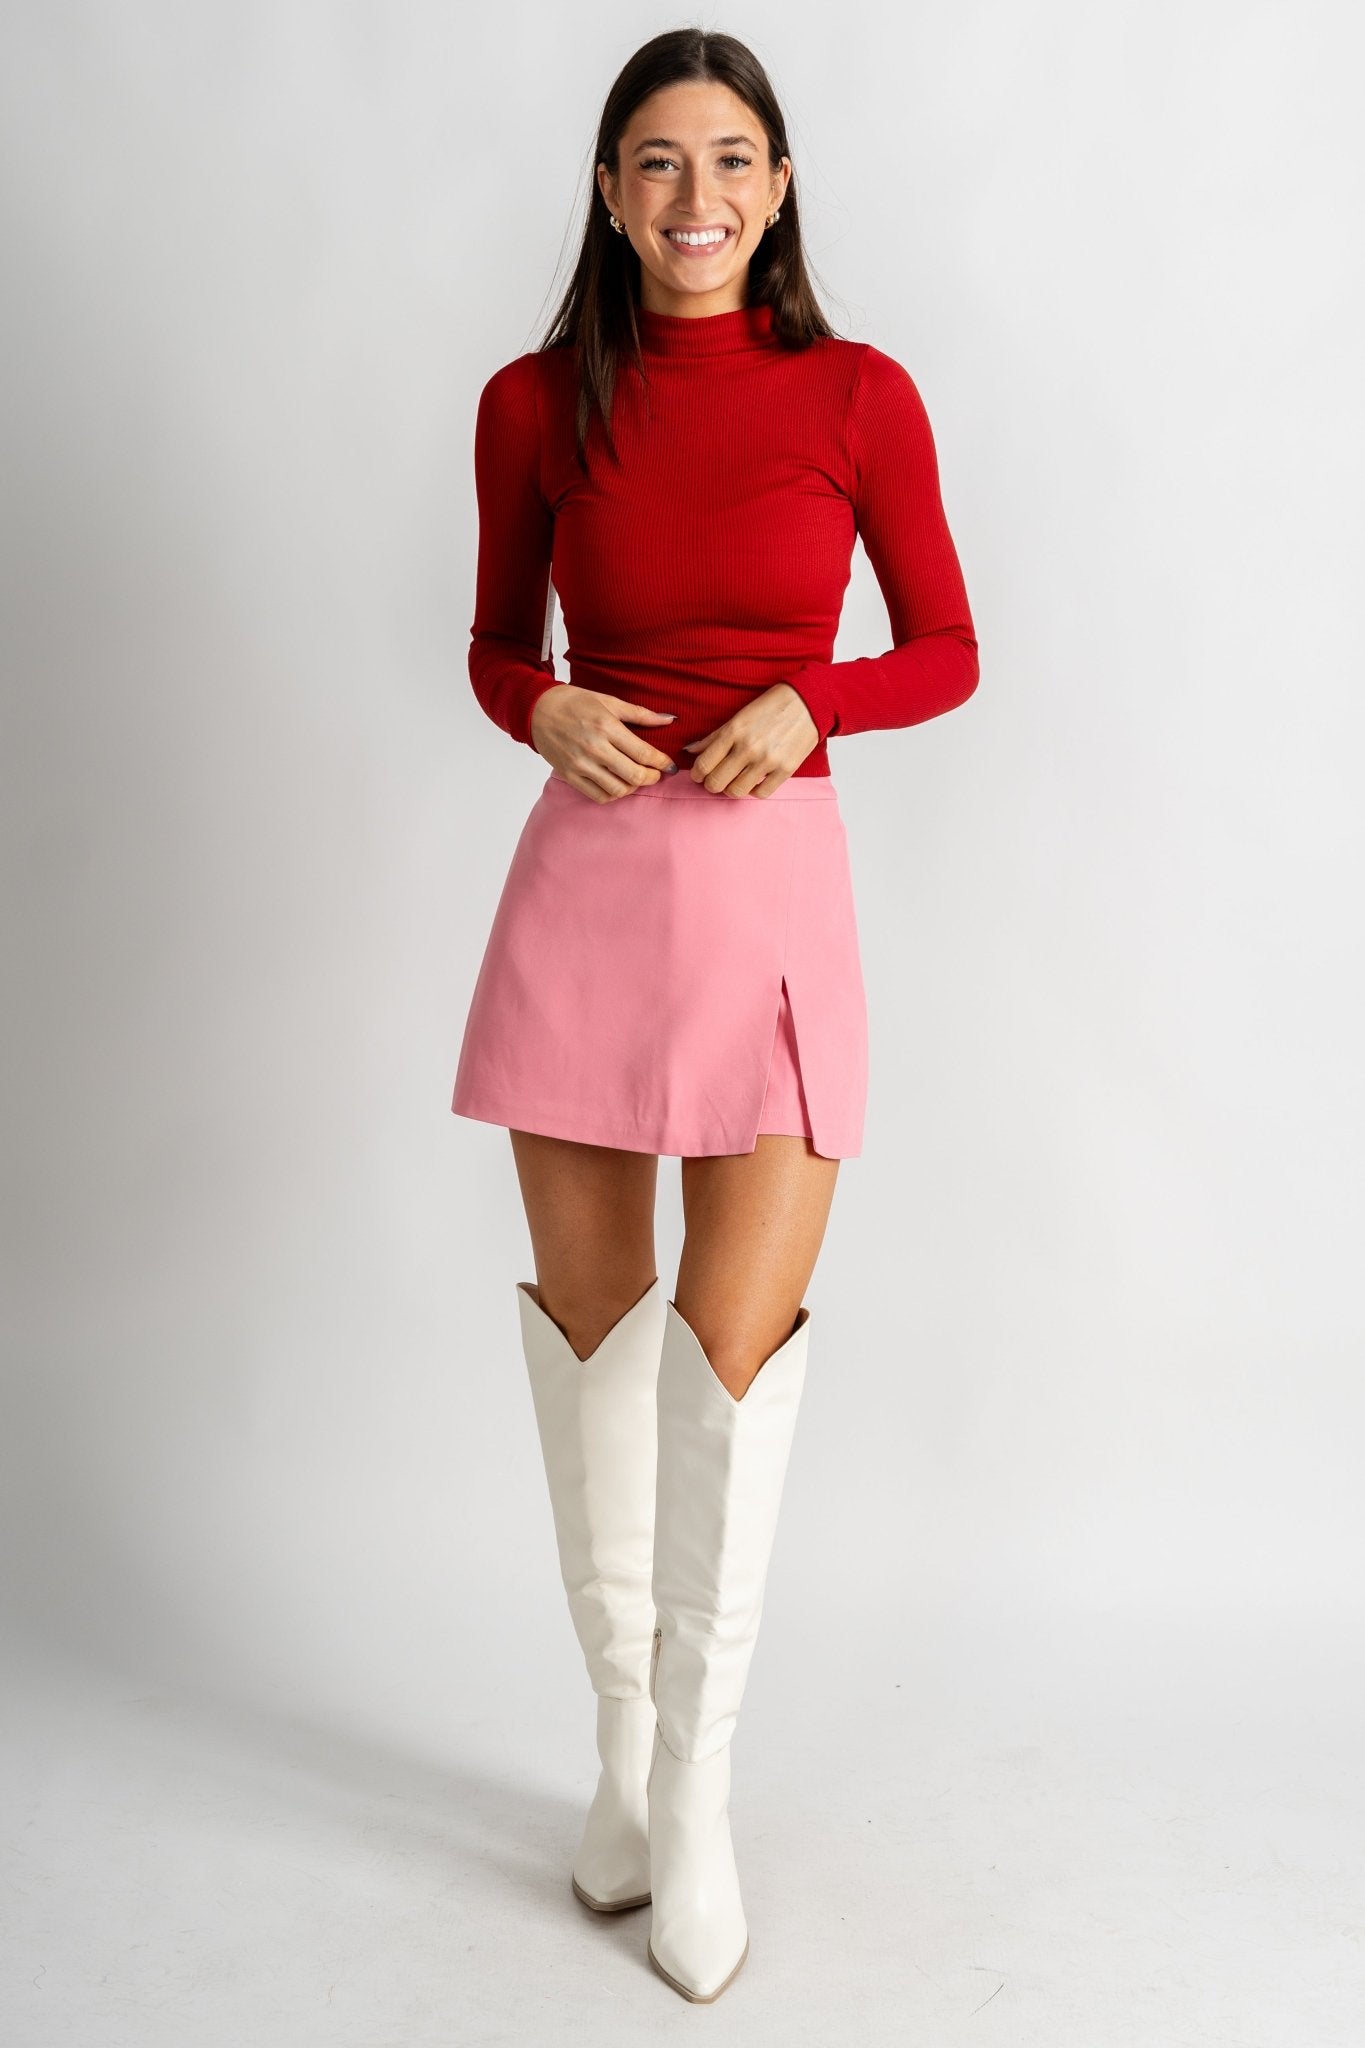 High waist skort with slit pink - Unique Valentine's Day T-Shirt Designs at Lush Fashion Lounge Boutique in Oklahoma City